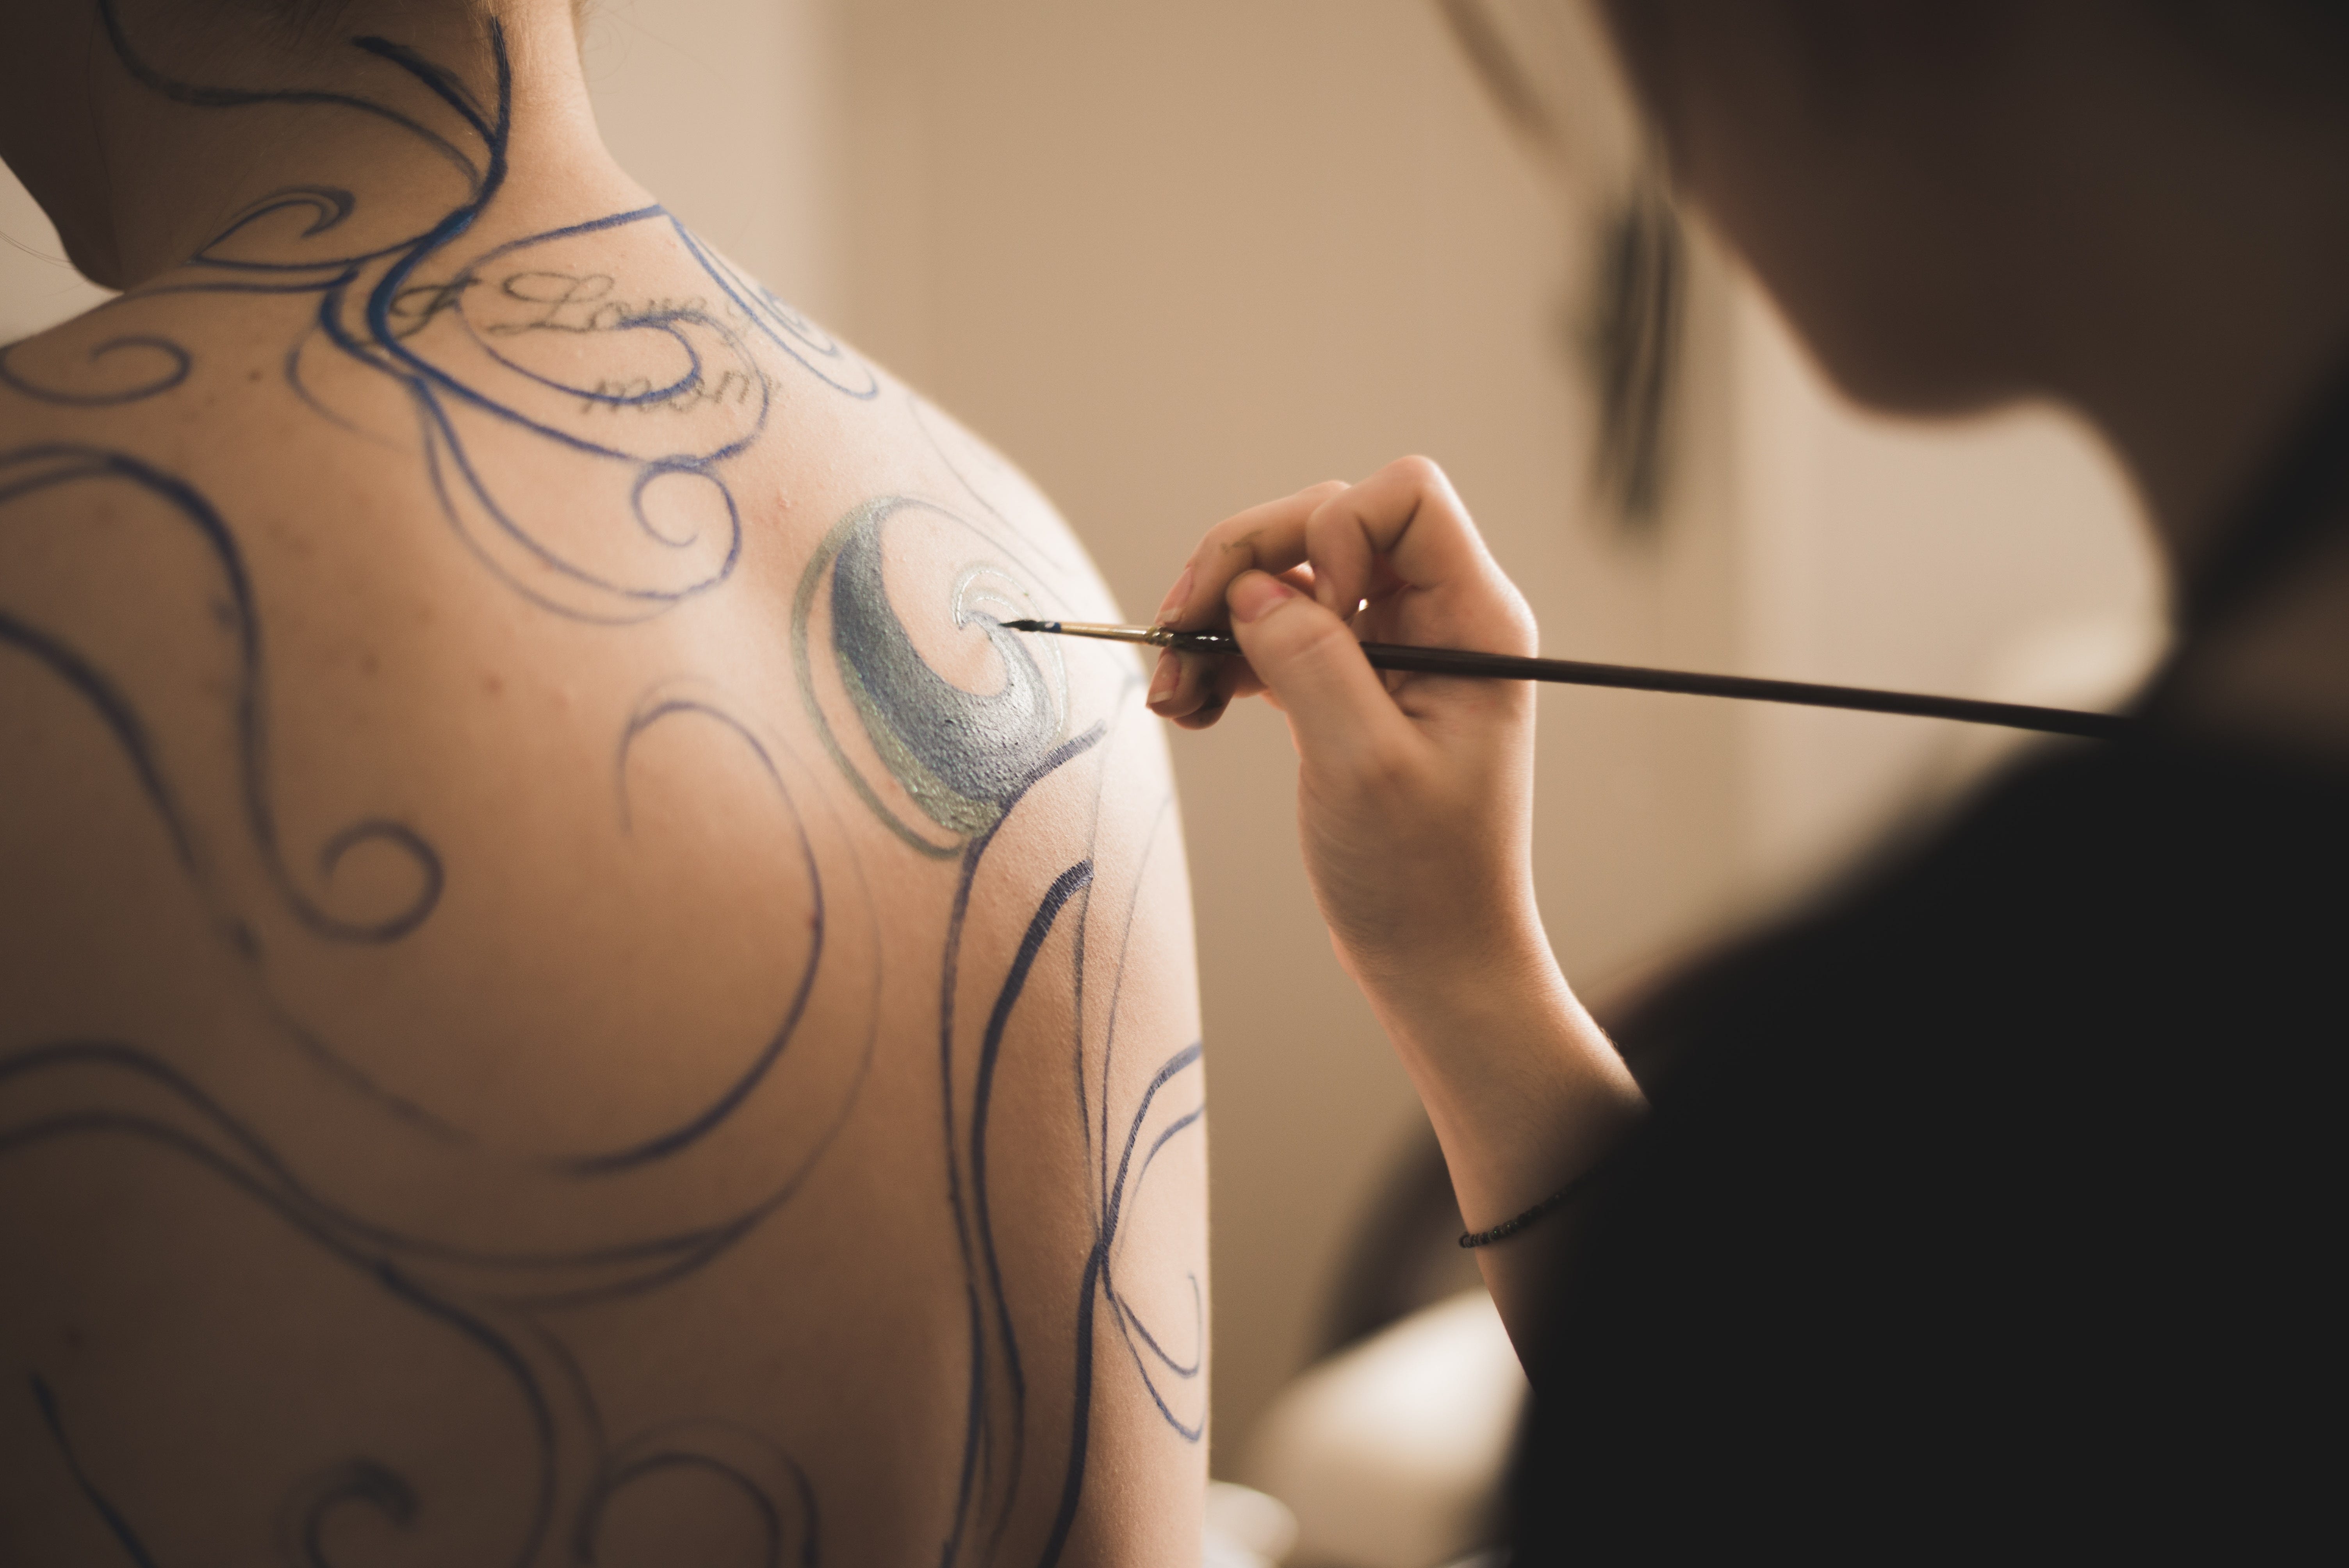 A Guide To Getting Tattooed. Valuable Advice from an Oft Tattooed… | by Zsófia Vera | The Startup | Medium